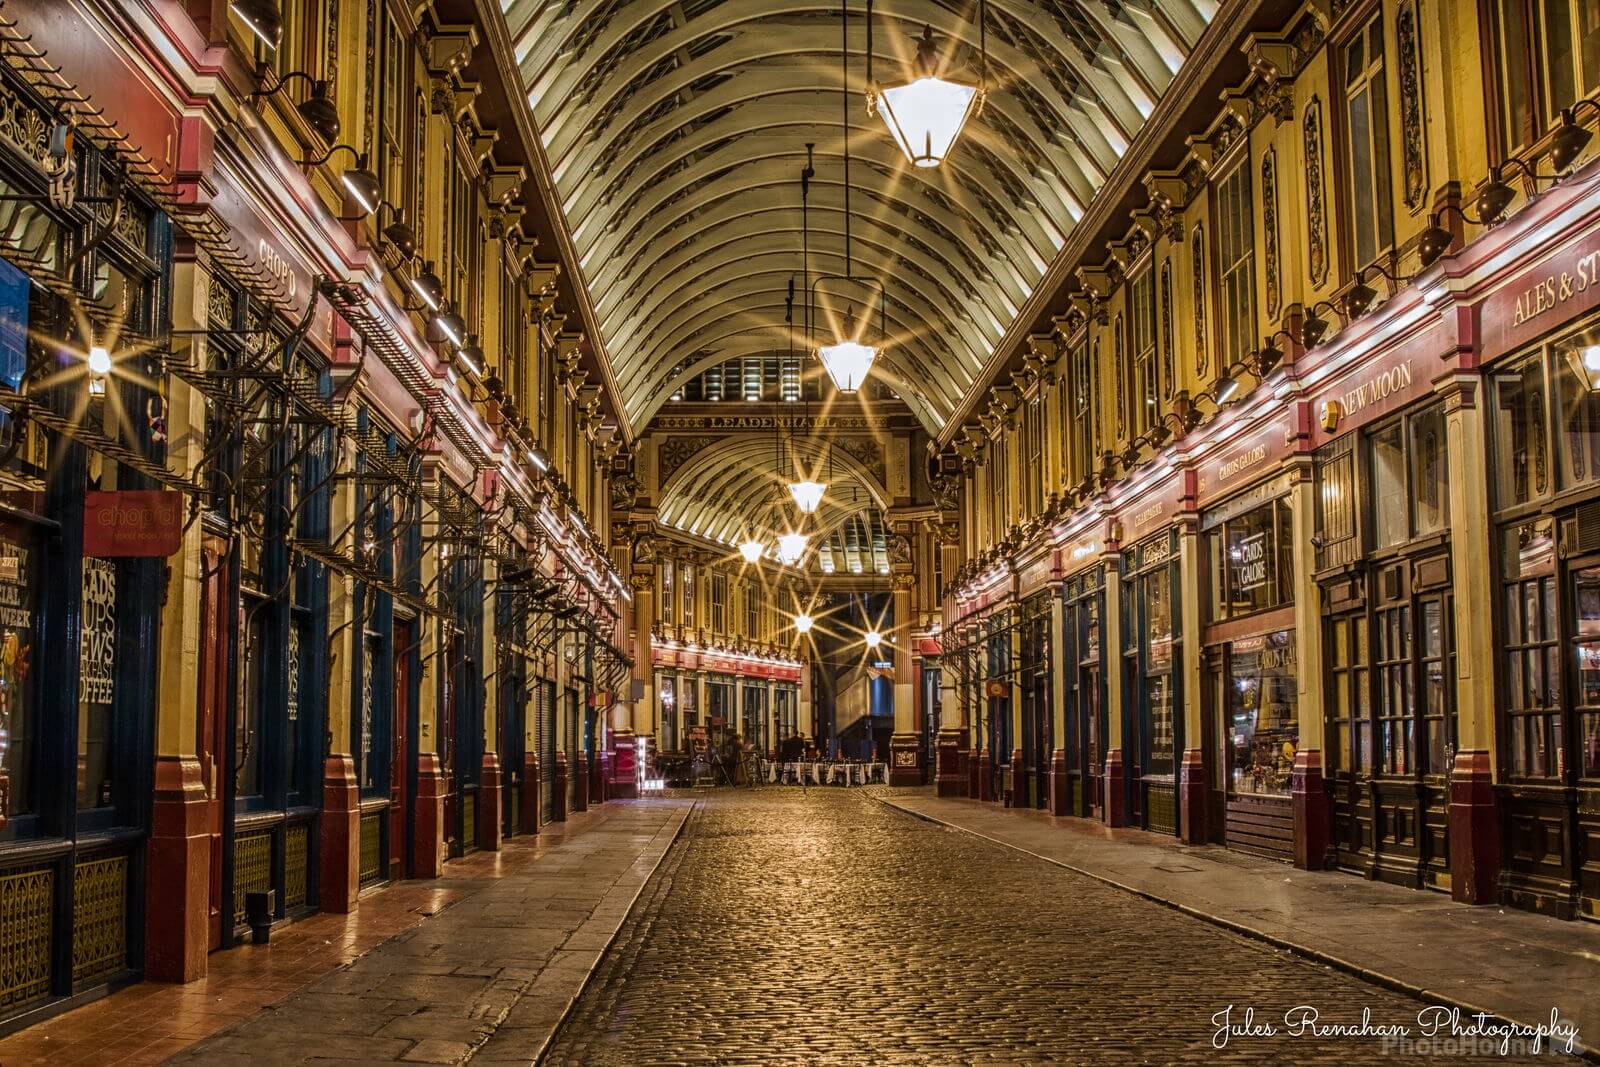 Image of Leadenhall Market by Jules Renahan